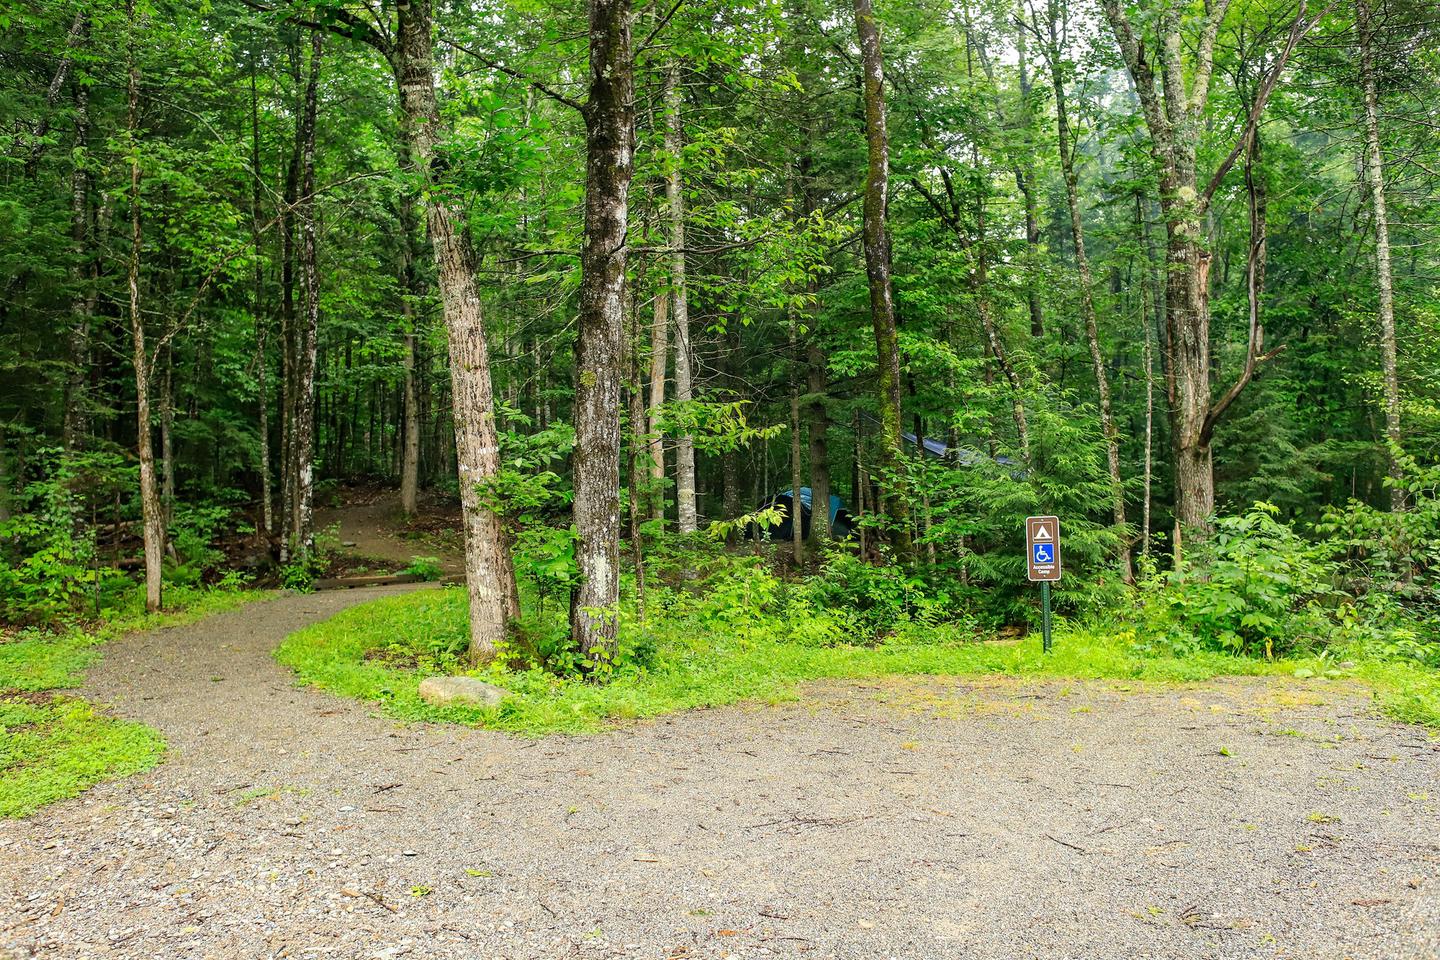 A level gravel surface accessible parking space is in the front. A level gravel path extends from the parking space into the campground. The campground is densely forested with thick green vegetation.The marked accessible parking space is for campsite 1.